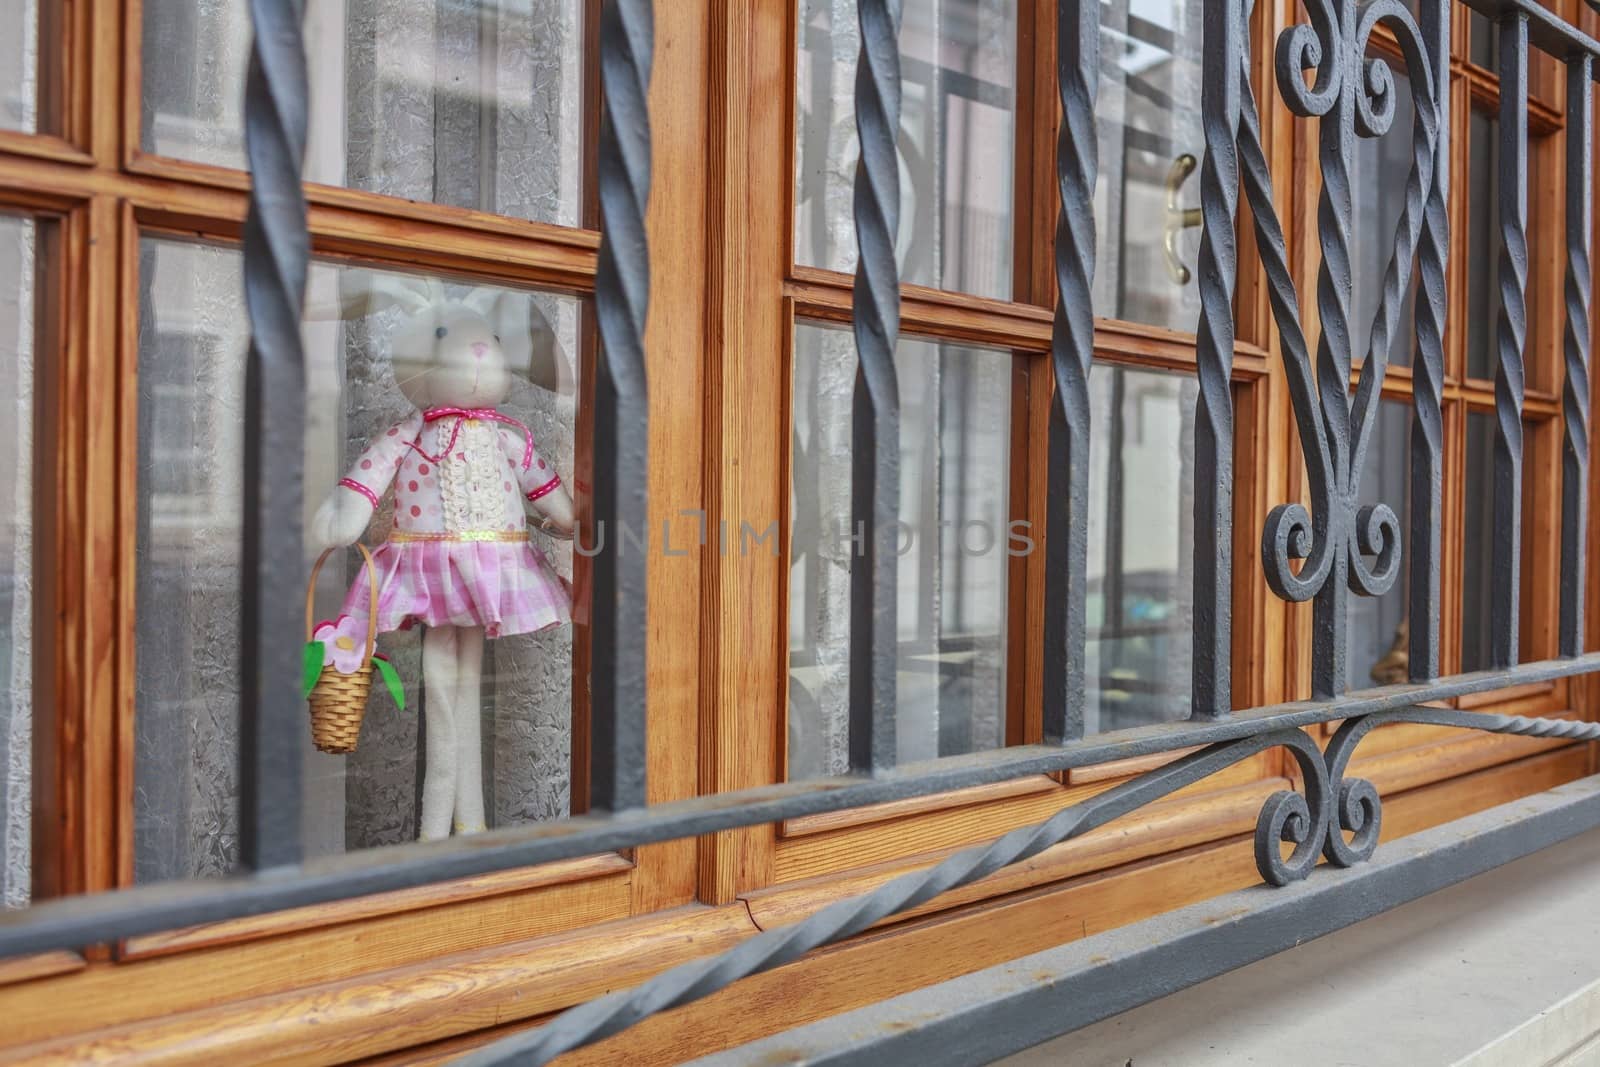 Sad picture of an imprisoned plush staring at window glass.